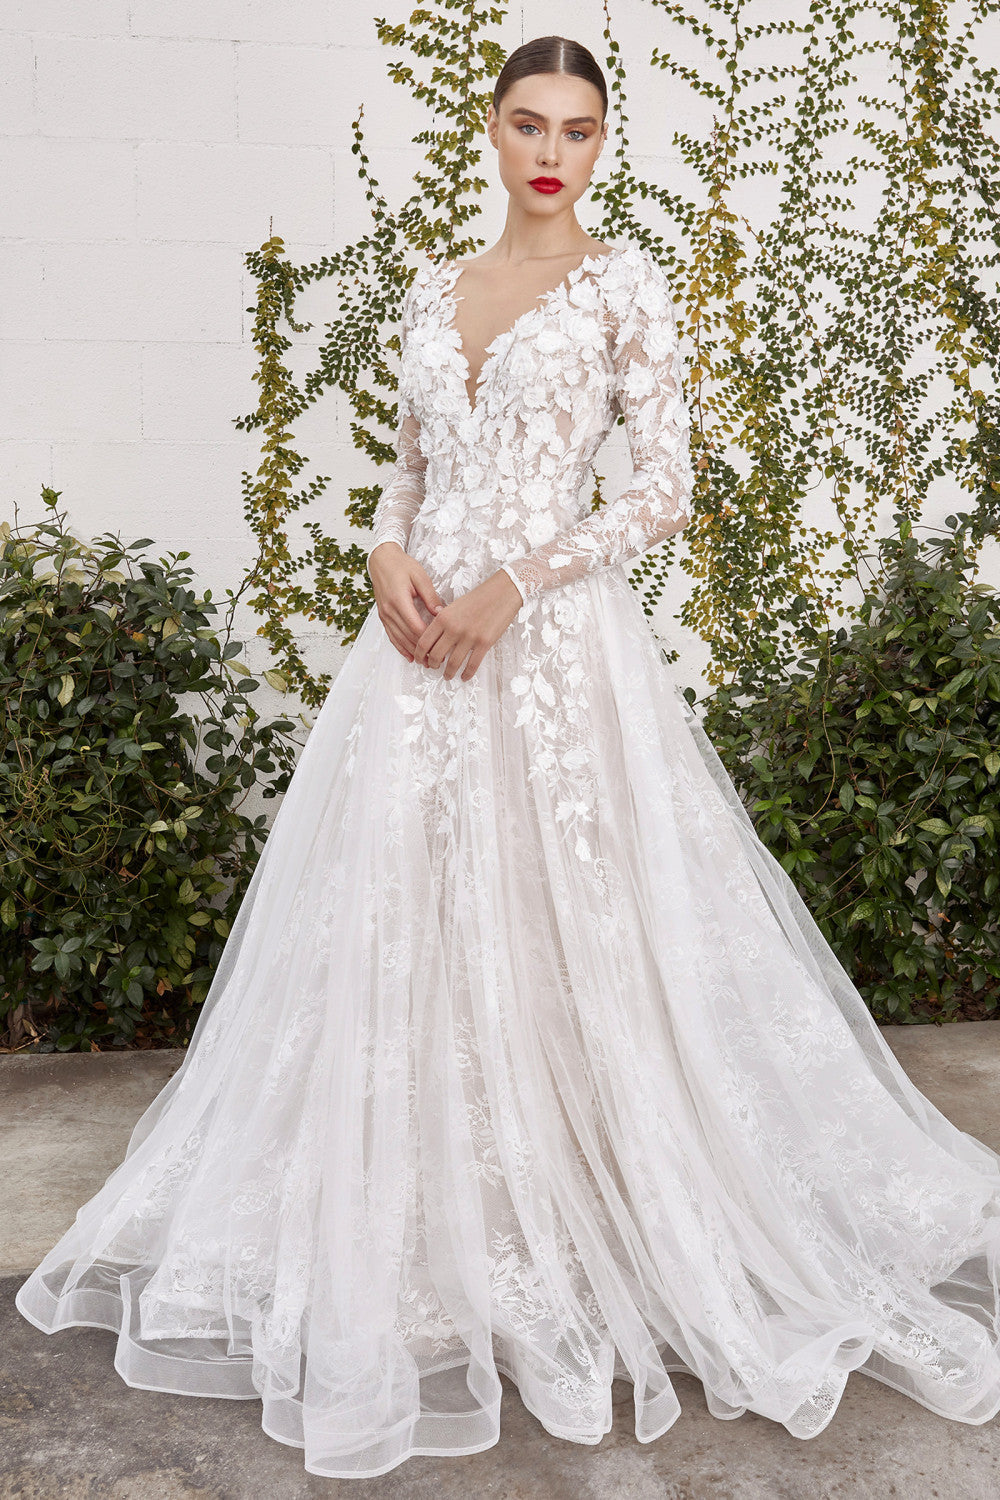 Floral Long Sleeve A-Line Bridal Gown by Andrea & Leo Couture - A1067WC Yvaine